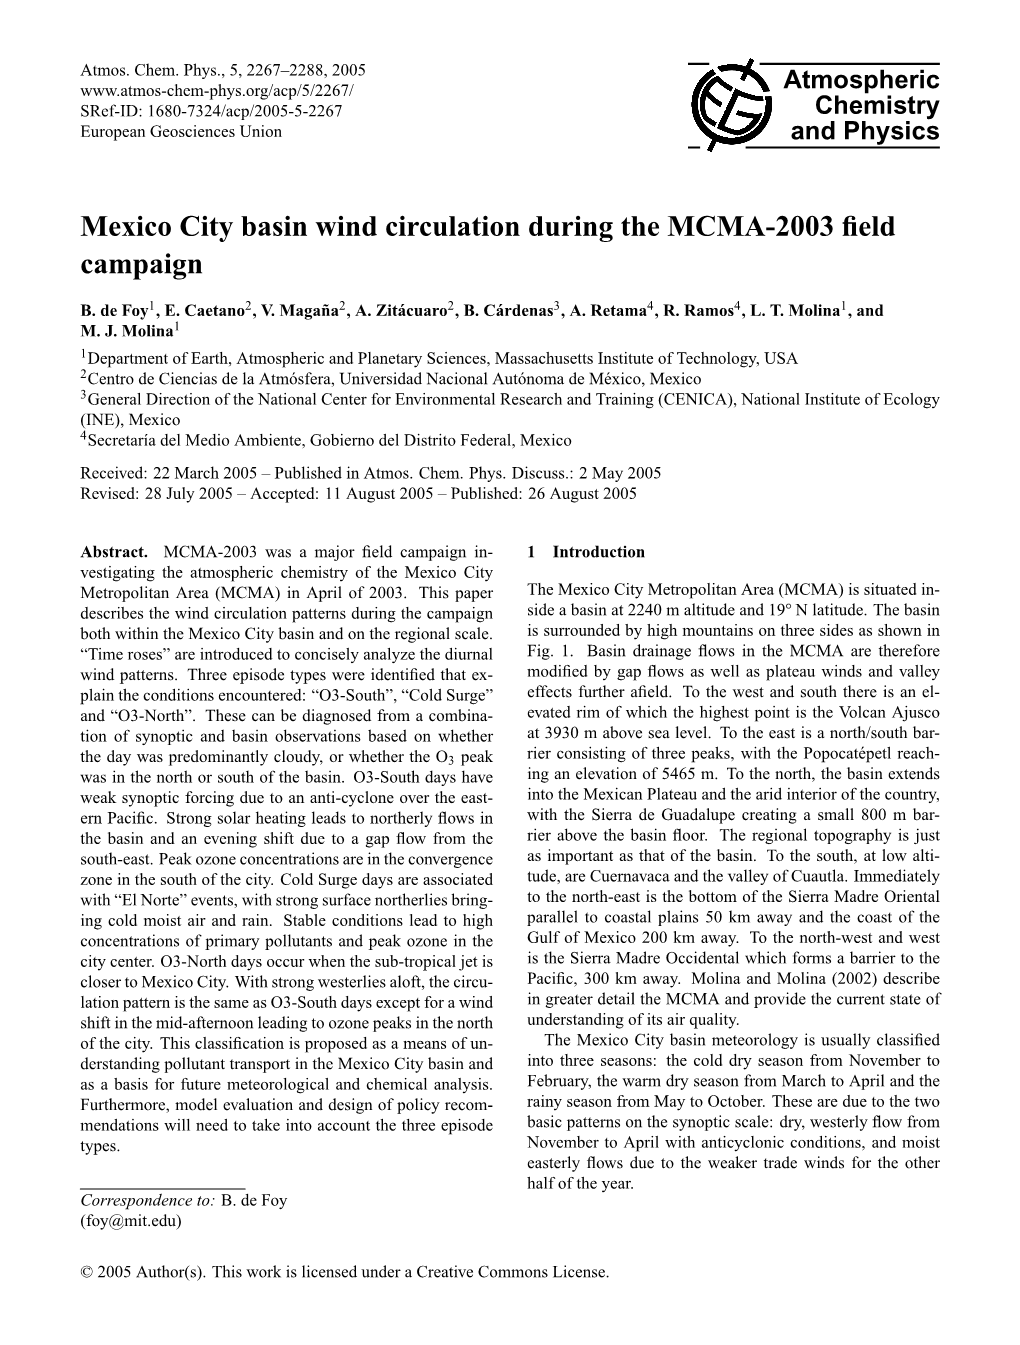 Mexico City Basin Wind Circulation During the MCMA-2003 Field